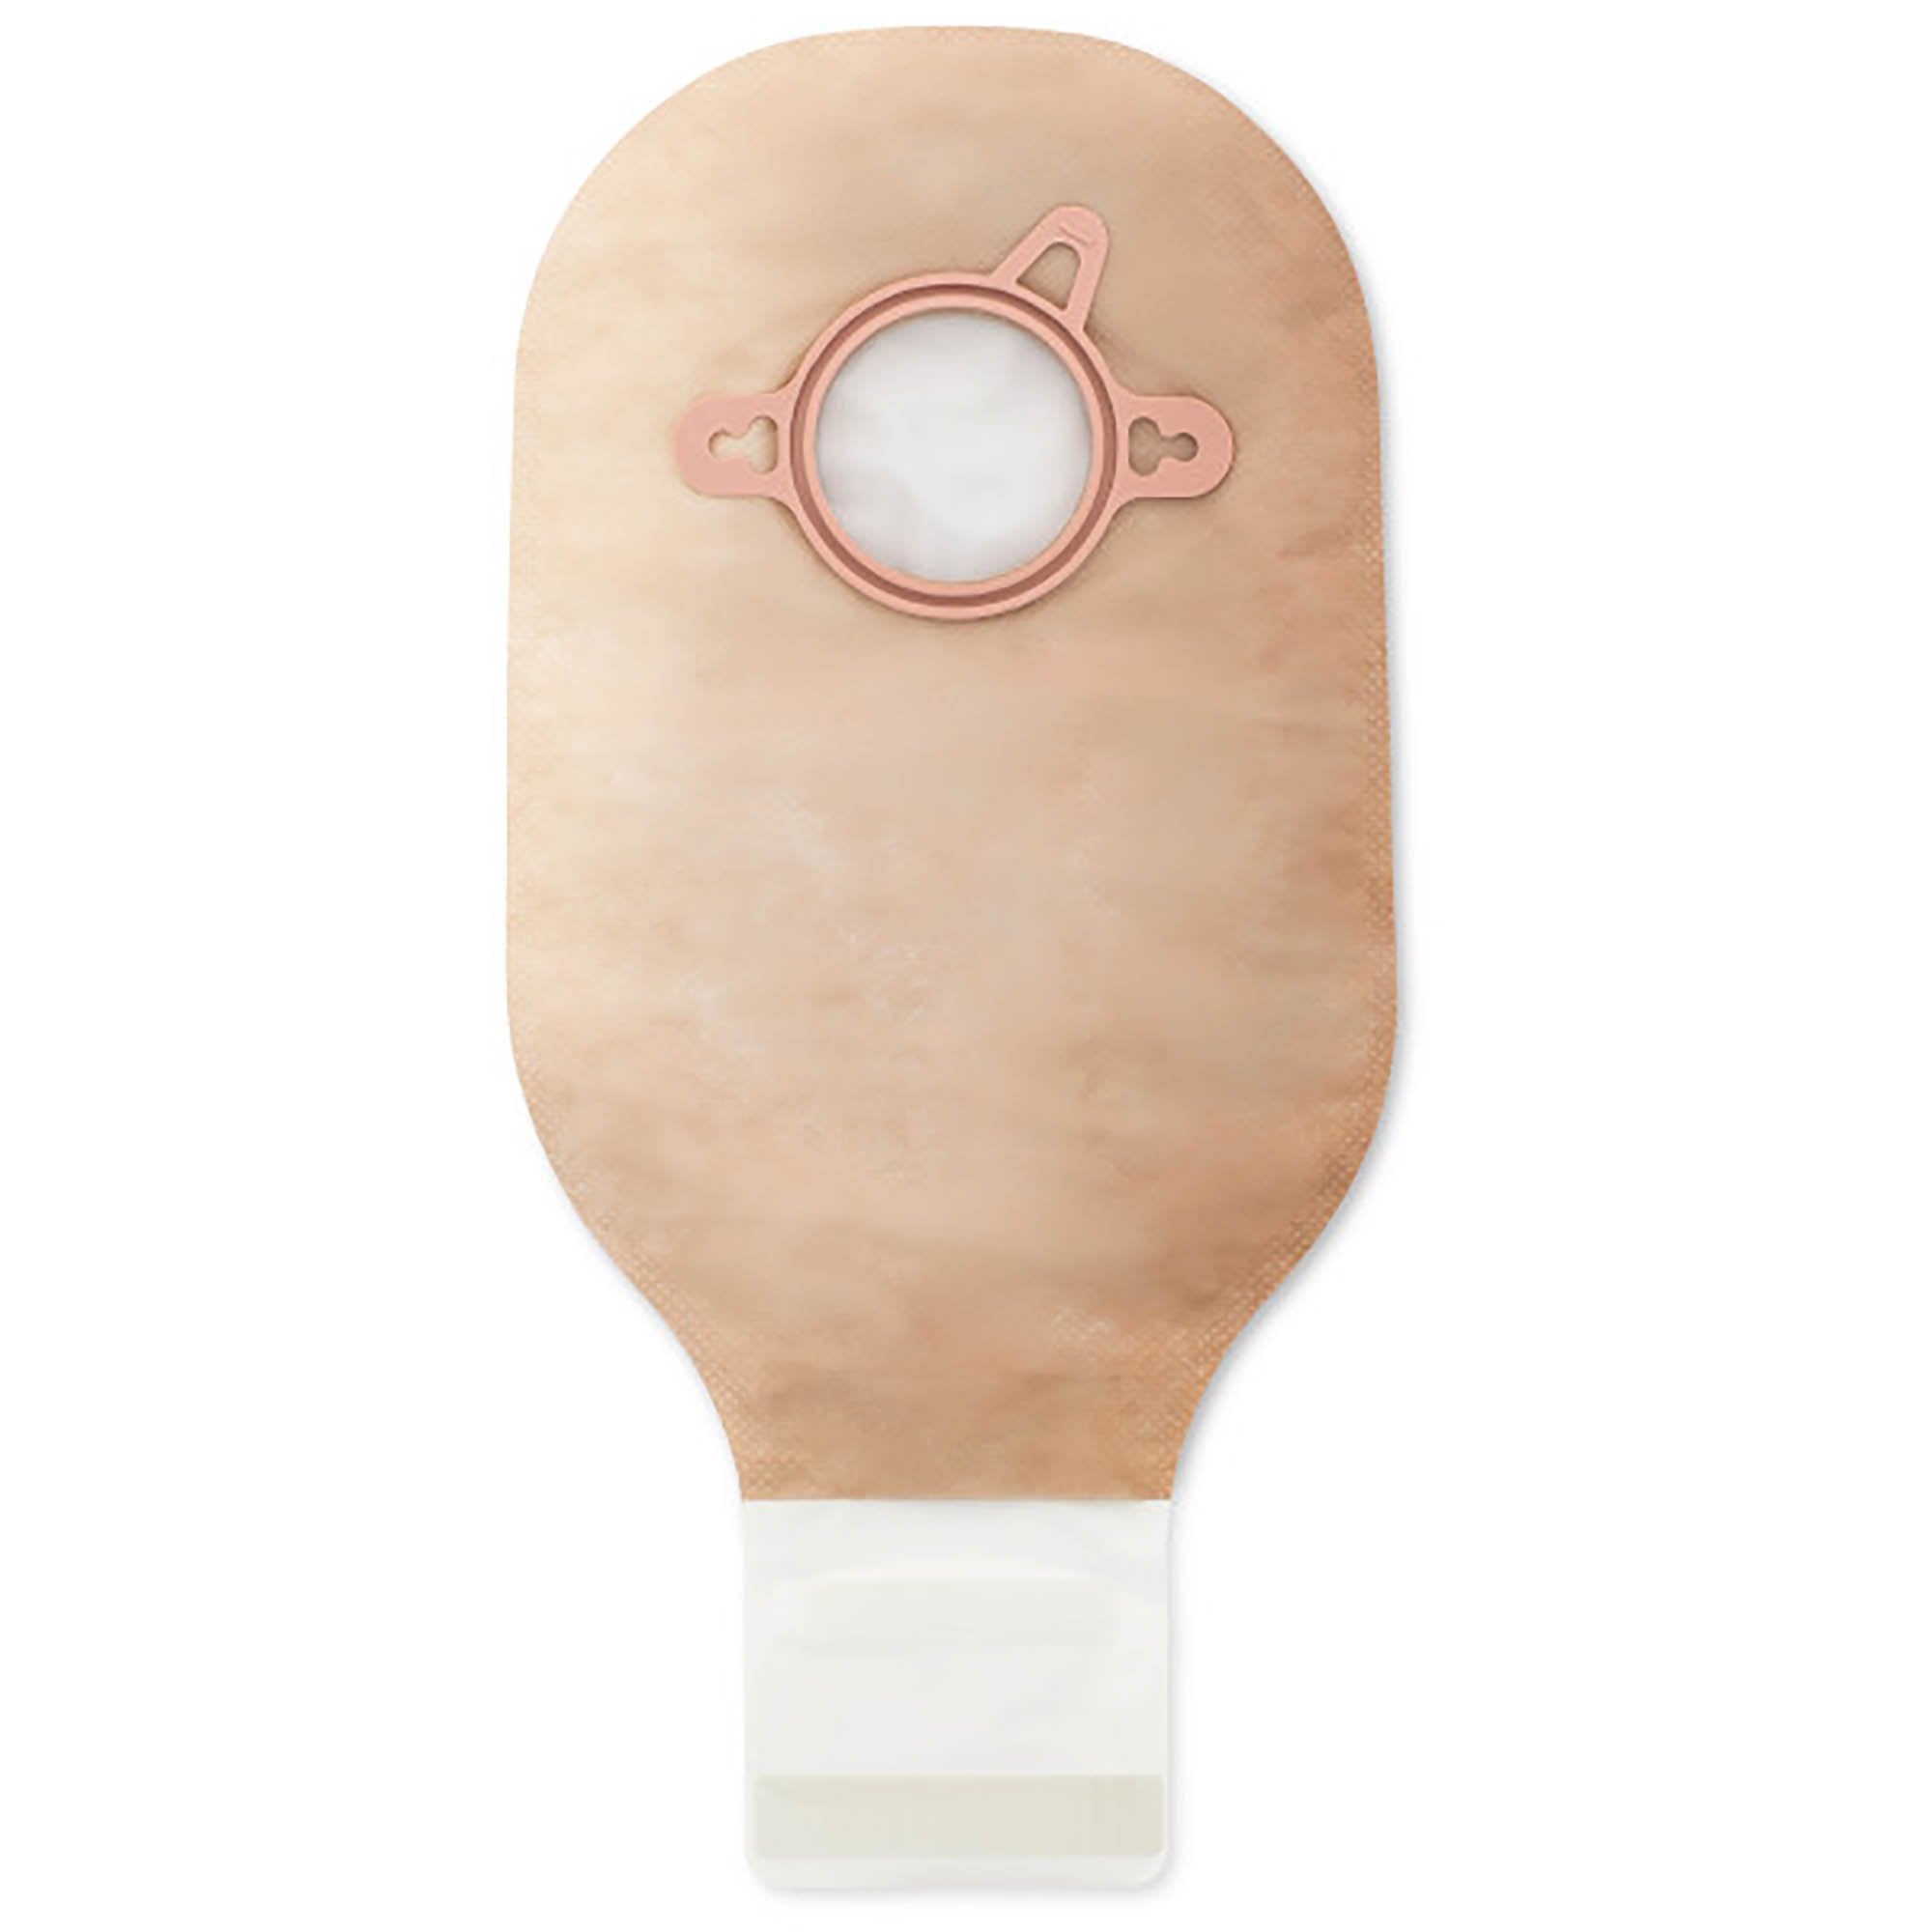 Colostomy Pouch New Image™ Two-Piece System 12 Inch Length Drainable